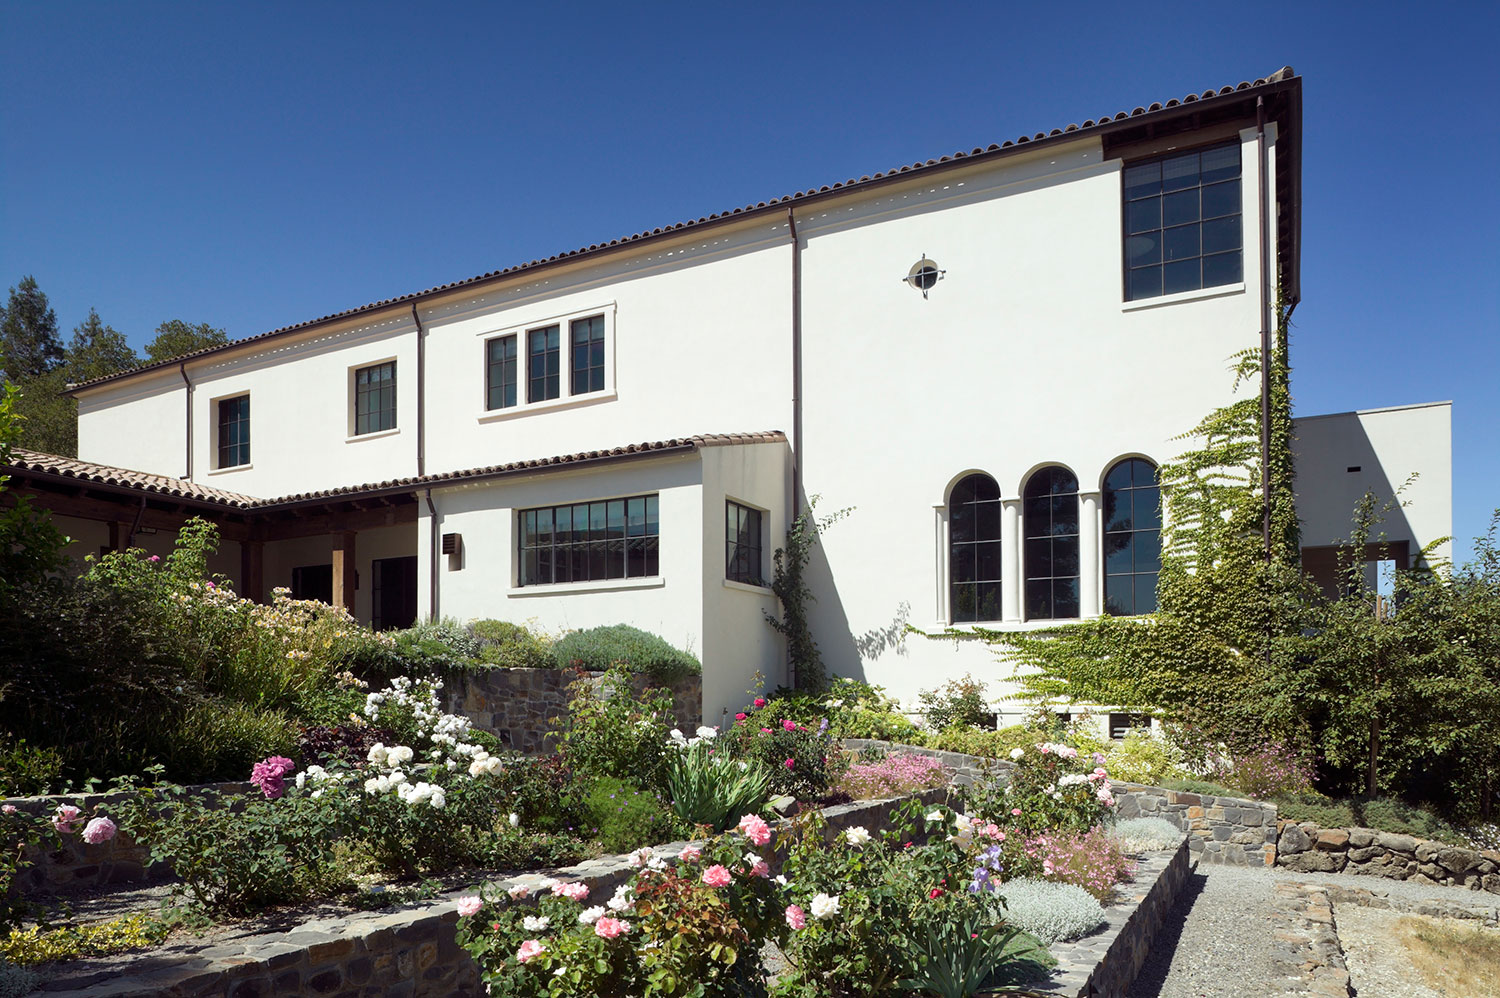  Location: Sonoma County, California  Project Type: New Residence 